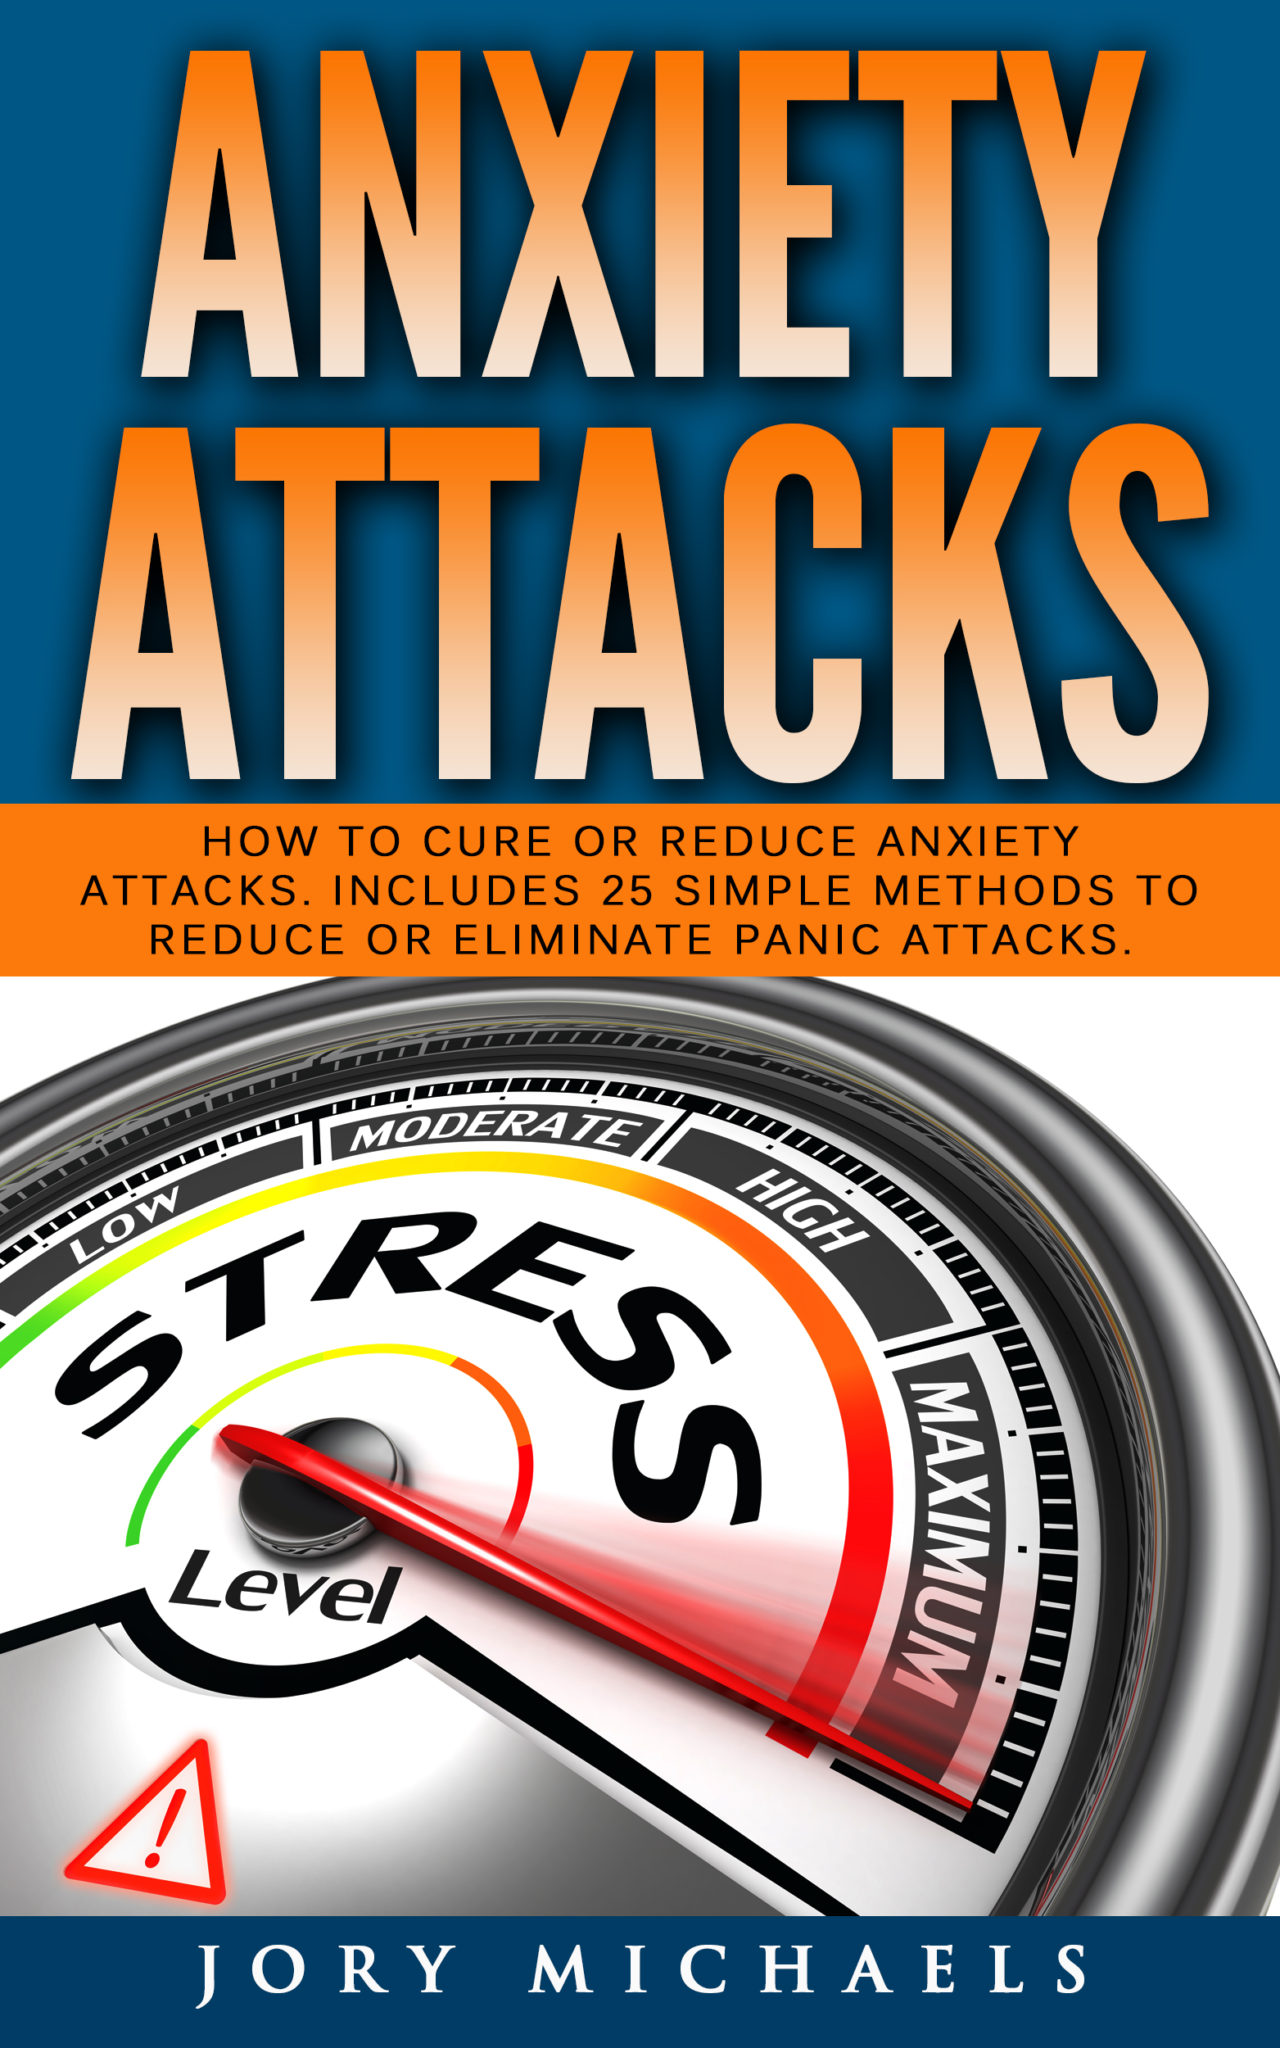 FREE: Anxiety Attacks by Jory Michaels